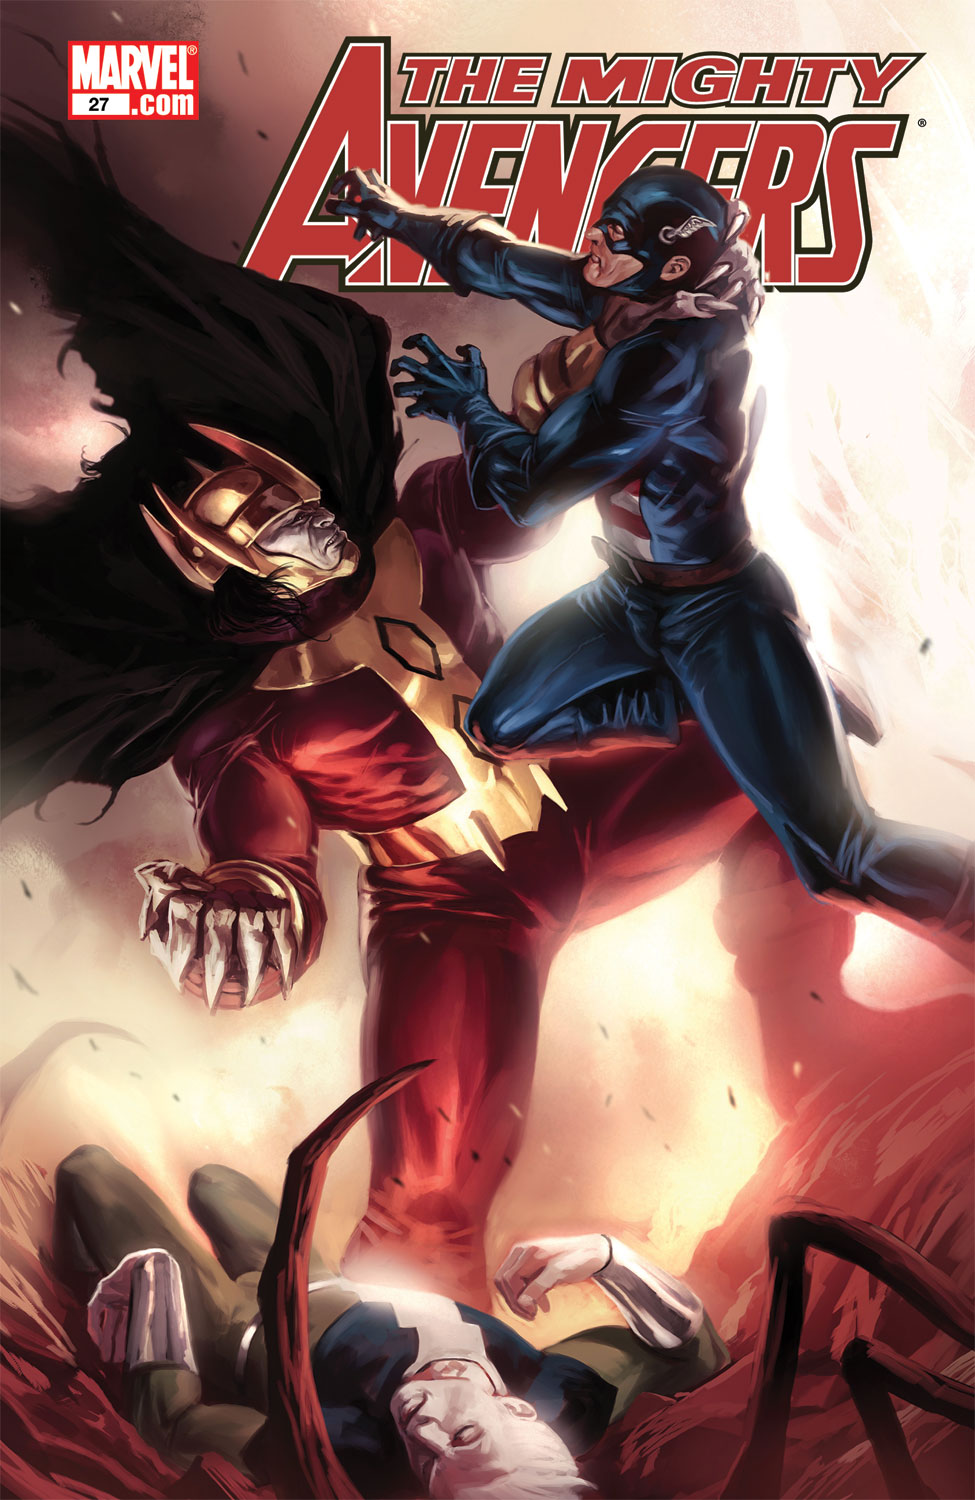 The Mighty Avengers (2007) #27